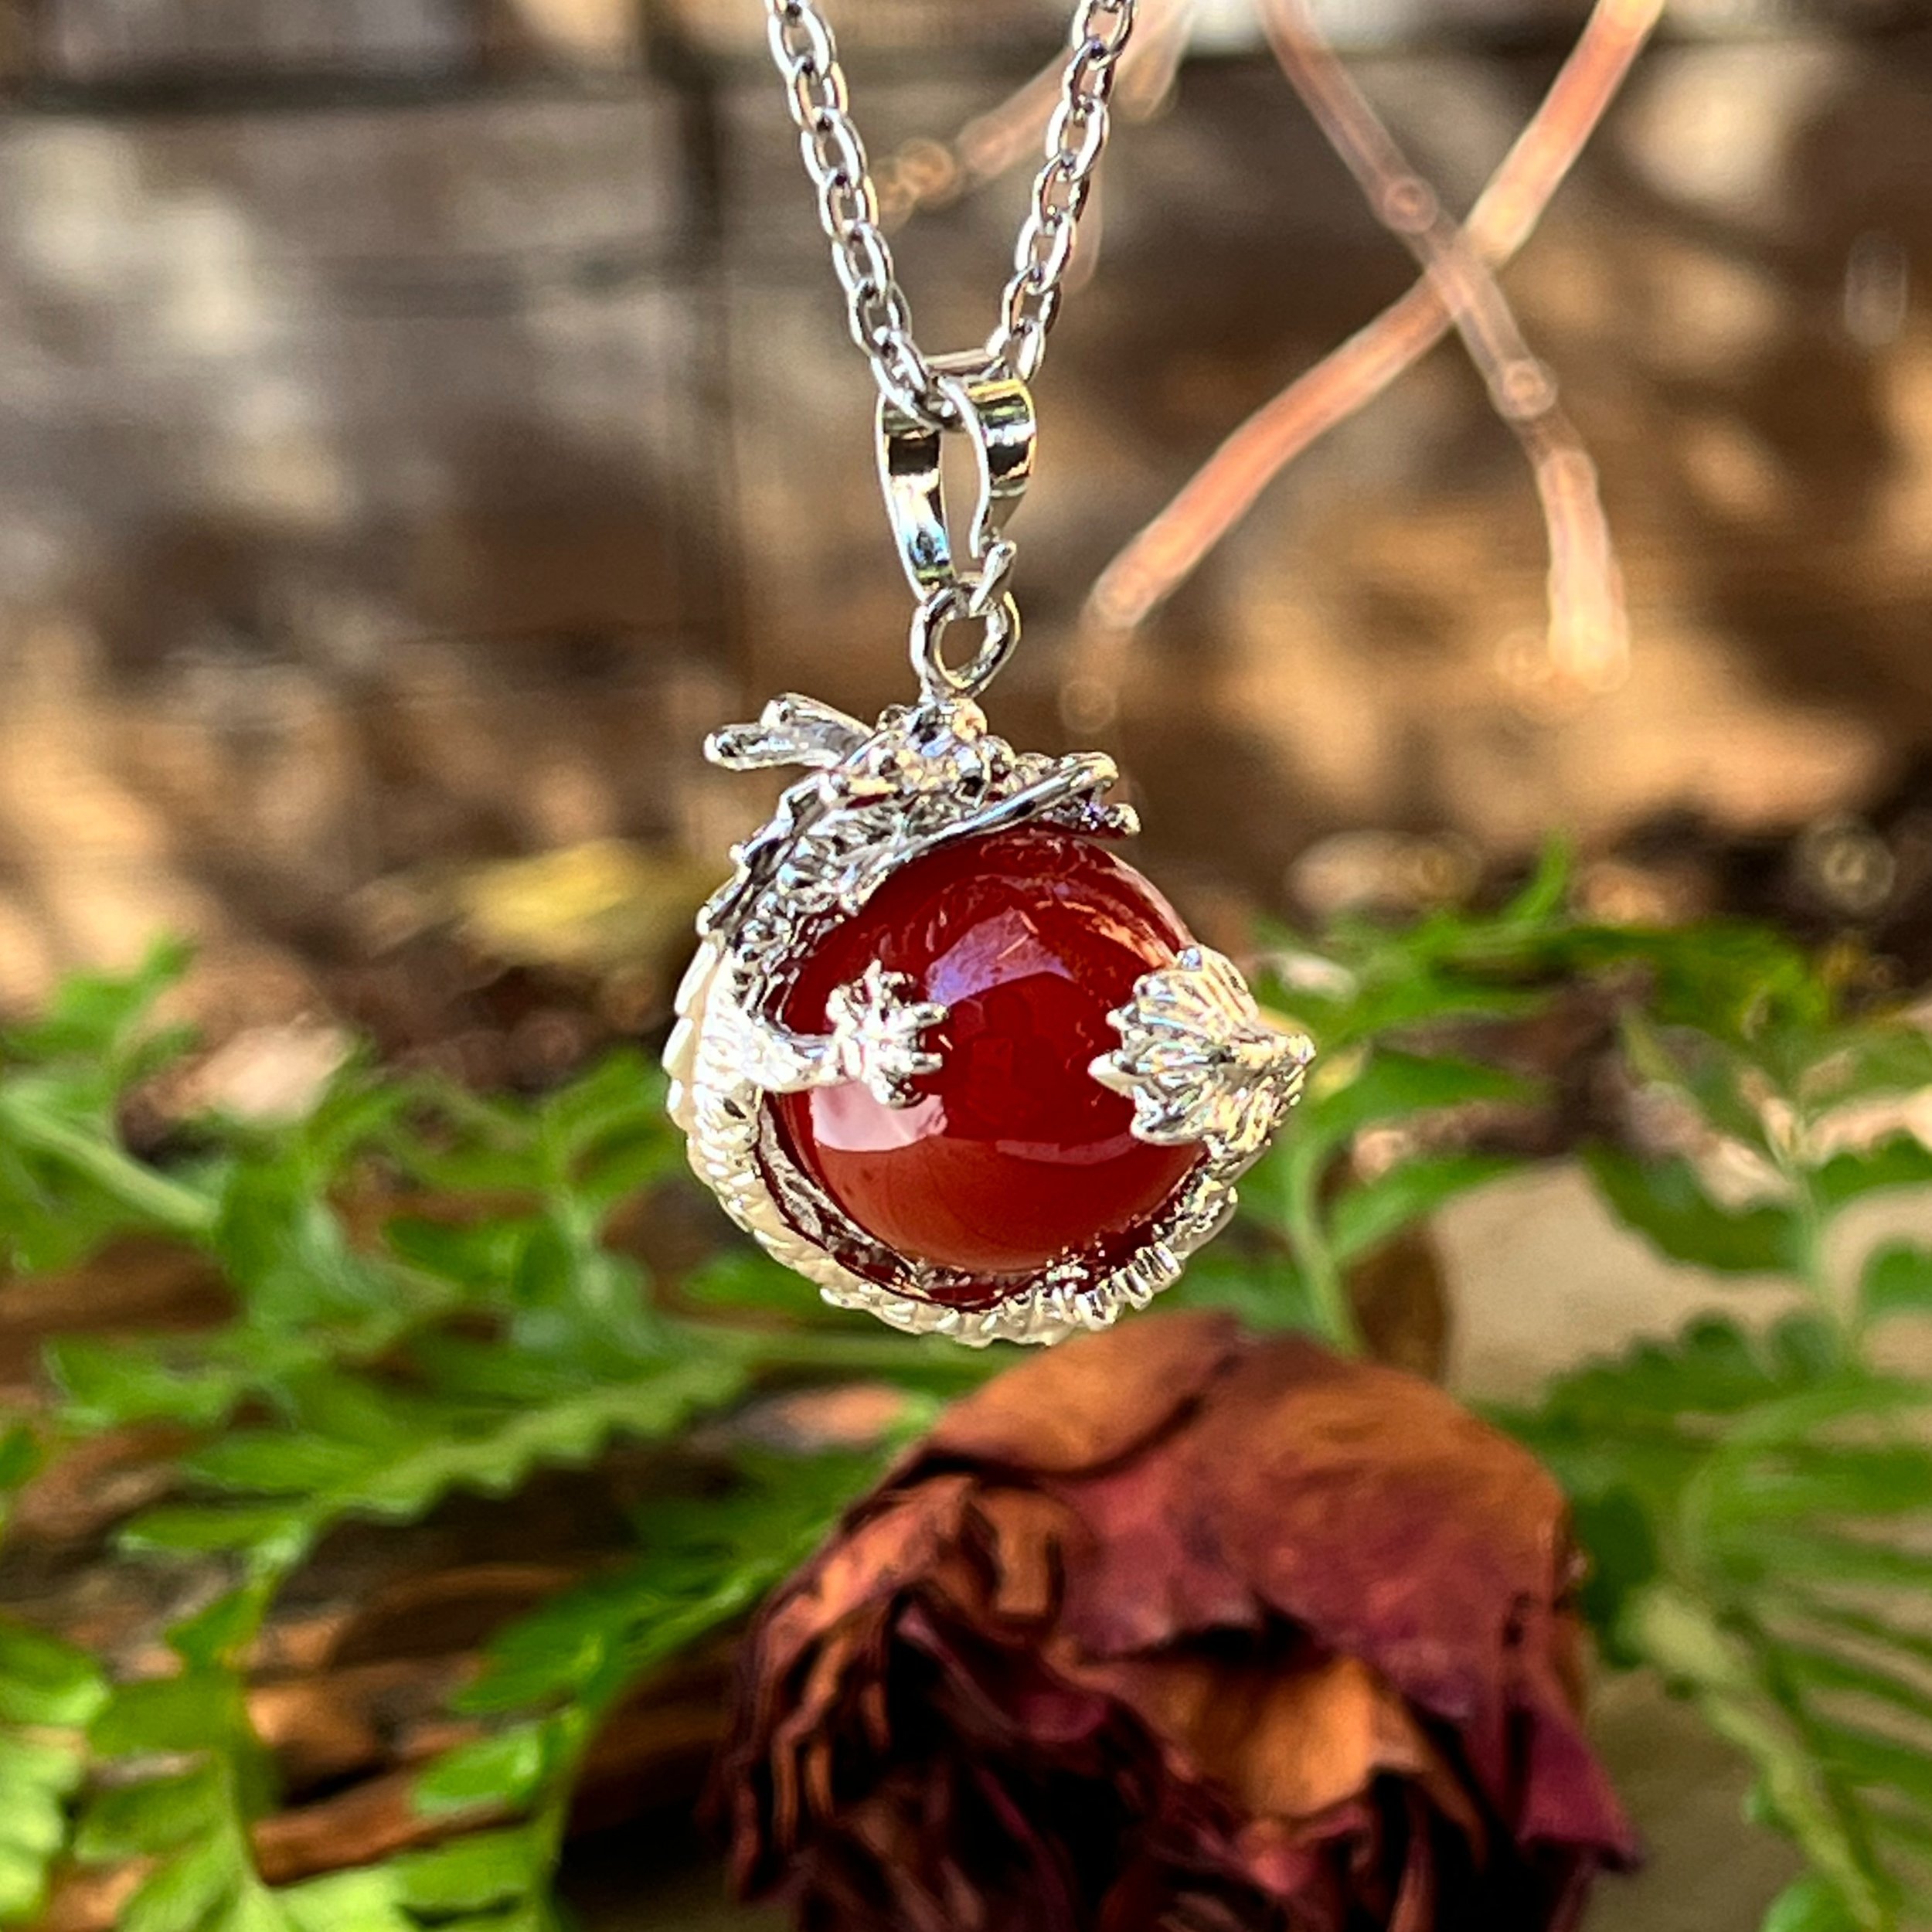 Premium Photo | Red agate necklace on stone